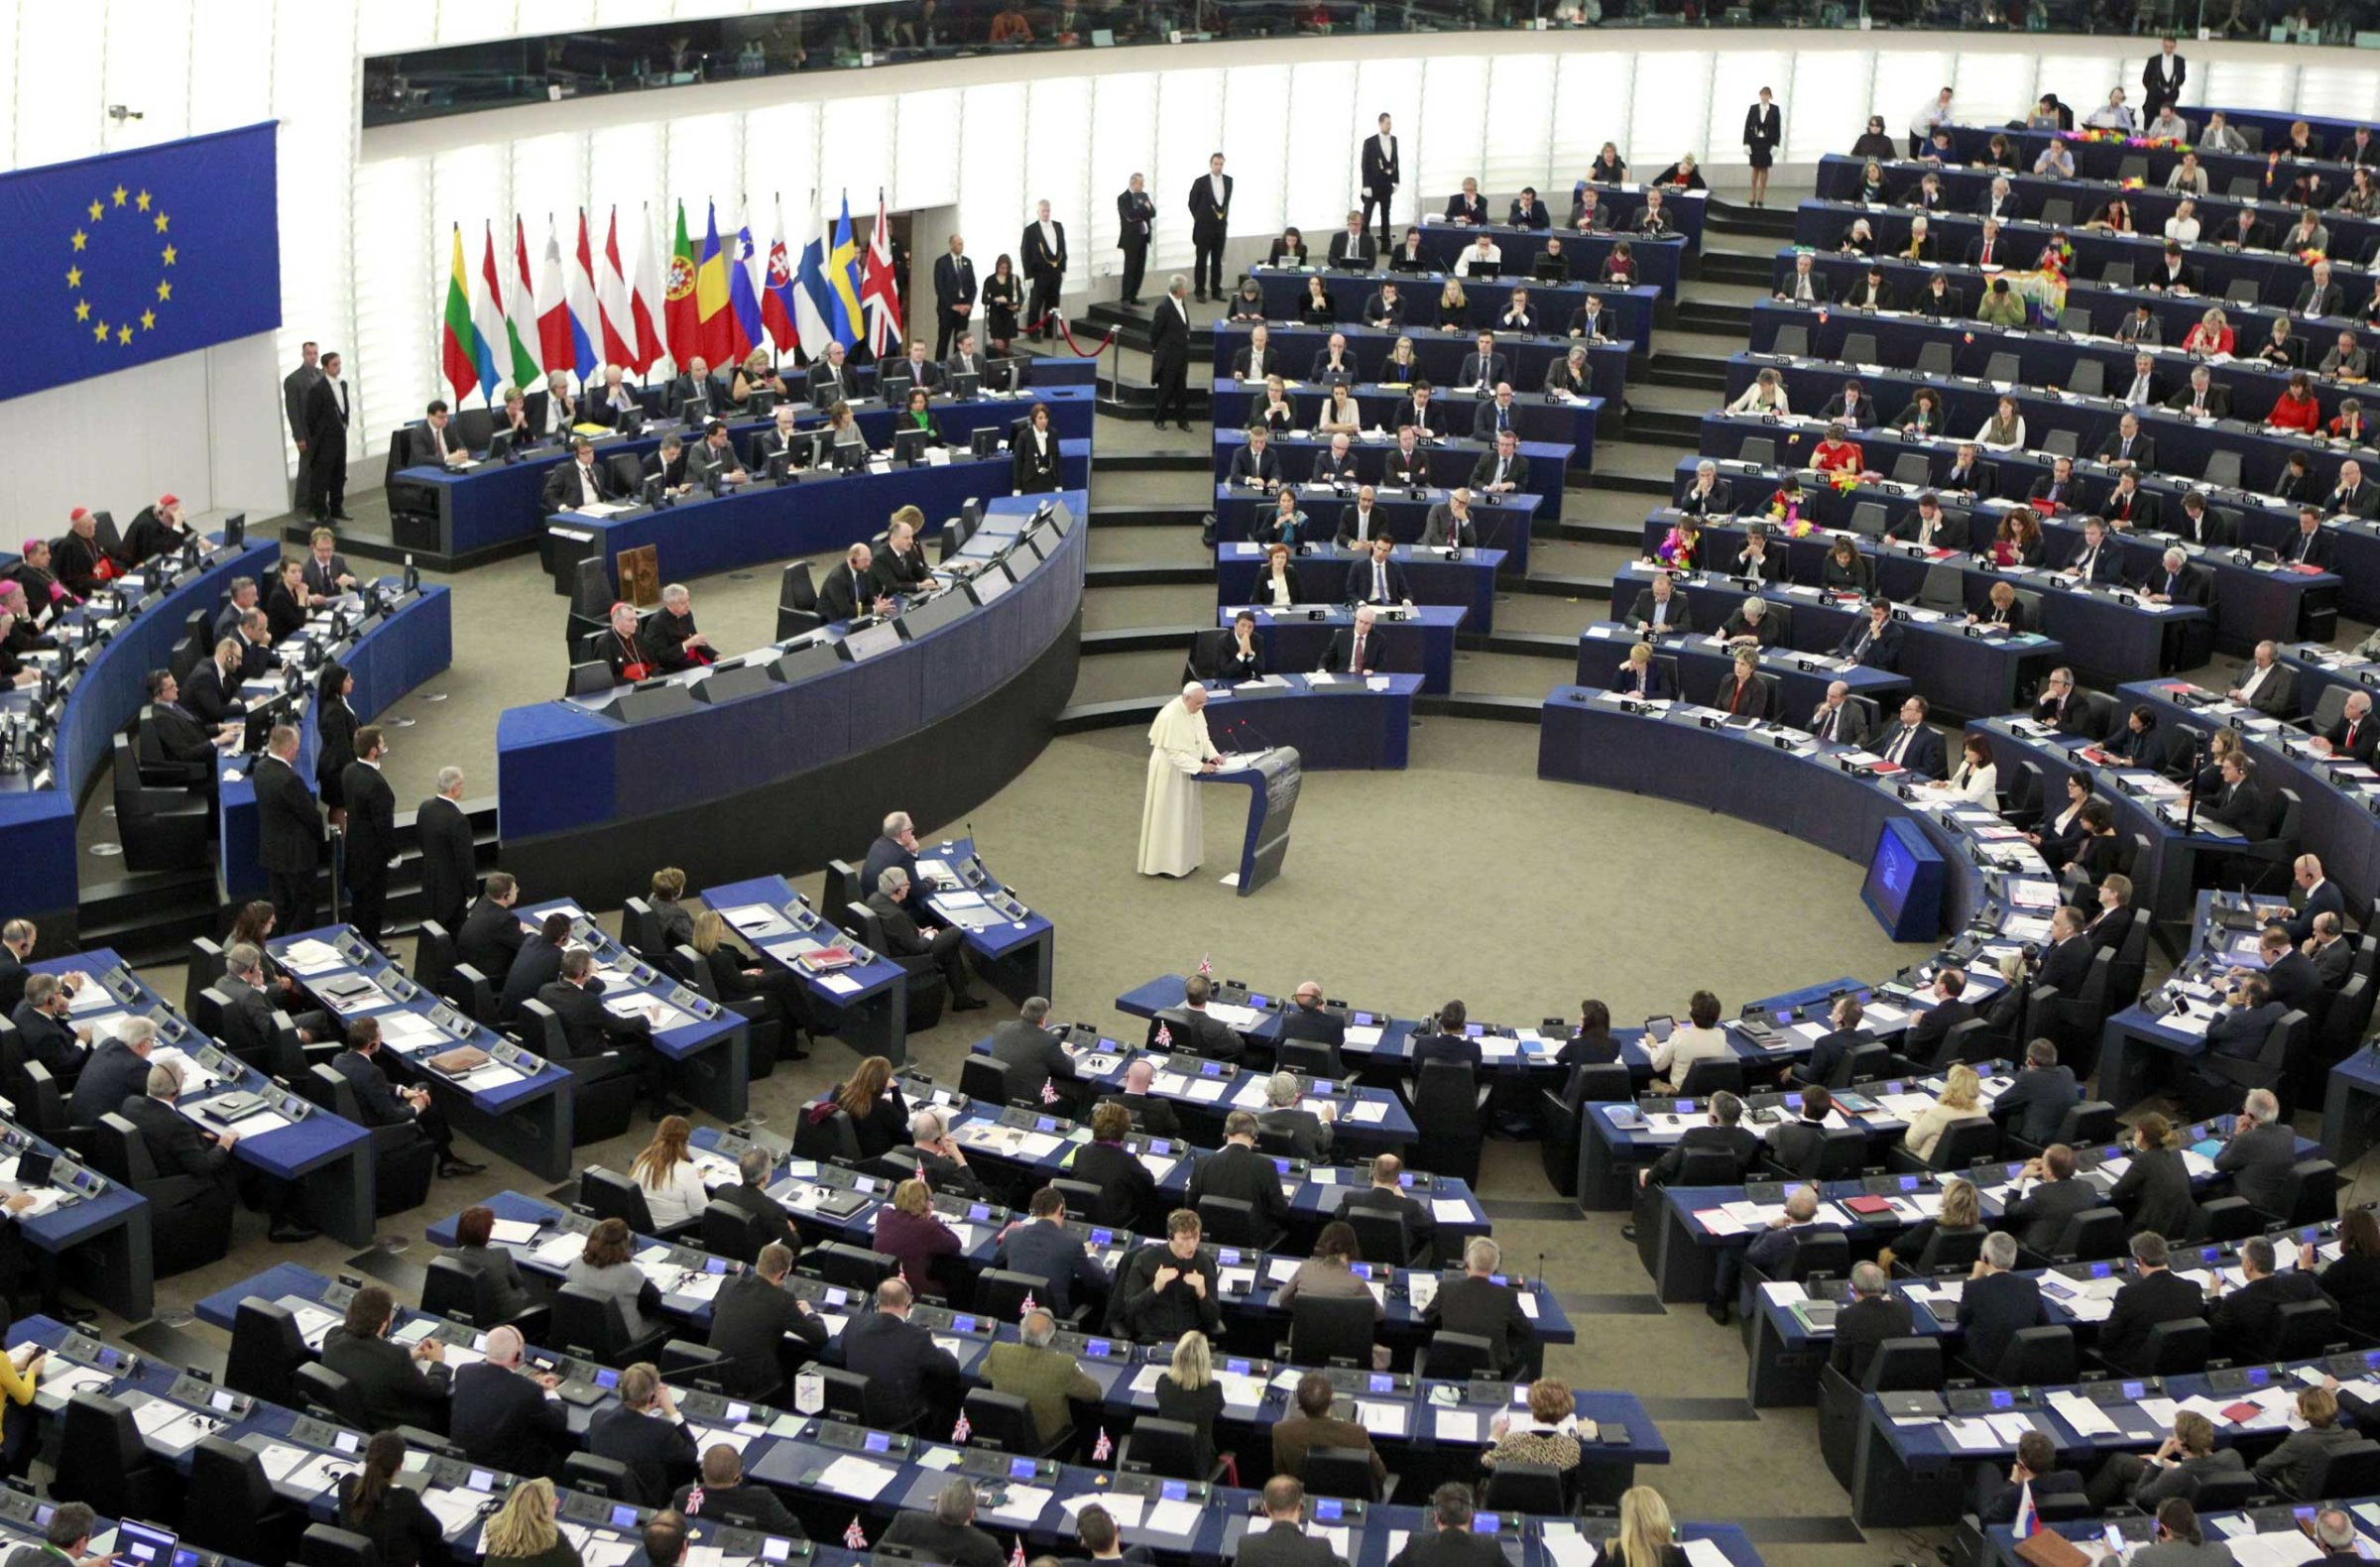 Pope Francis delivers his speech at the European Parliament in Strasbourg, eastern France, on Nov. 25, 2014.